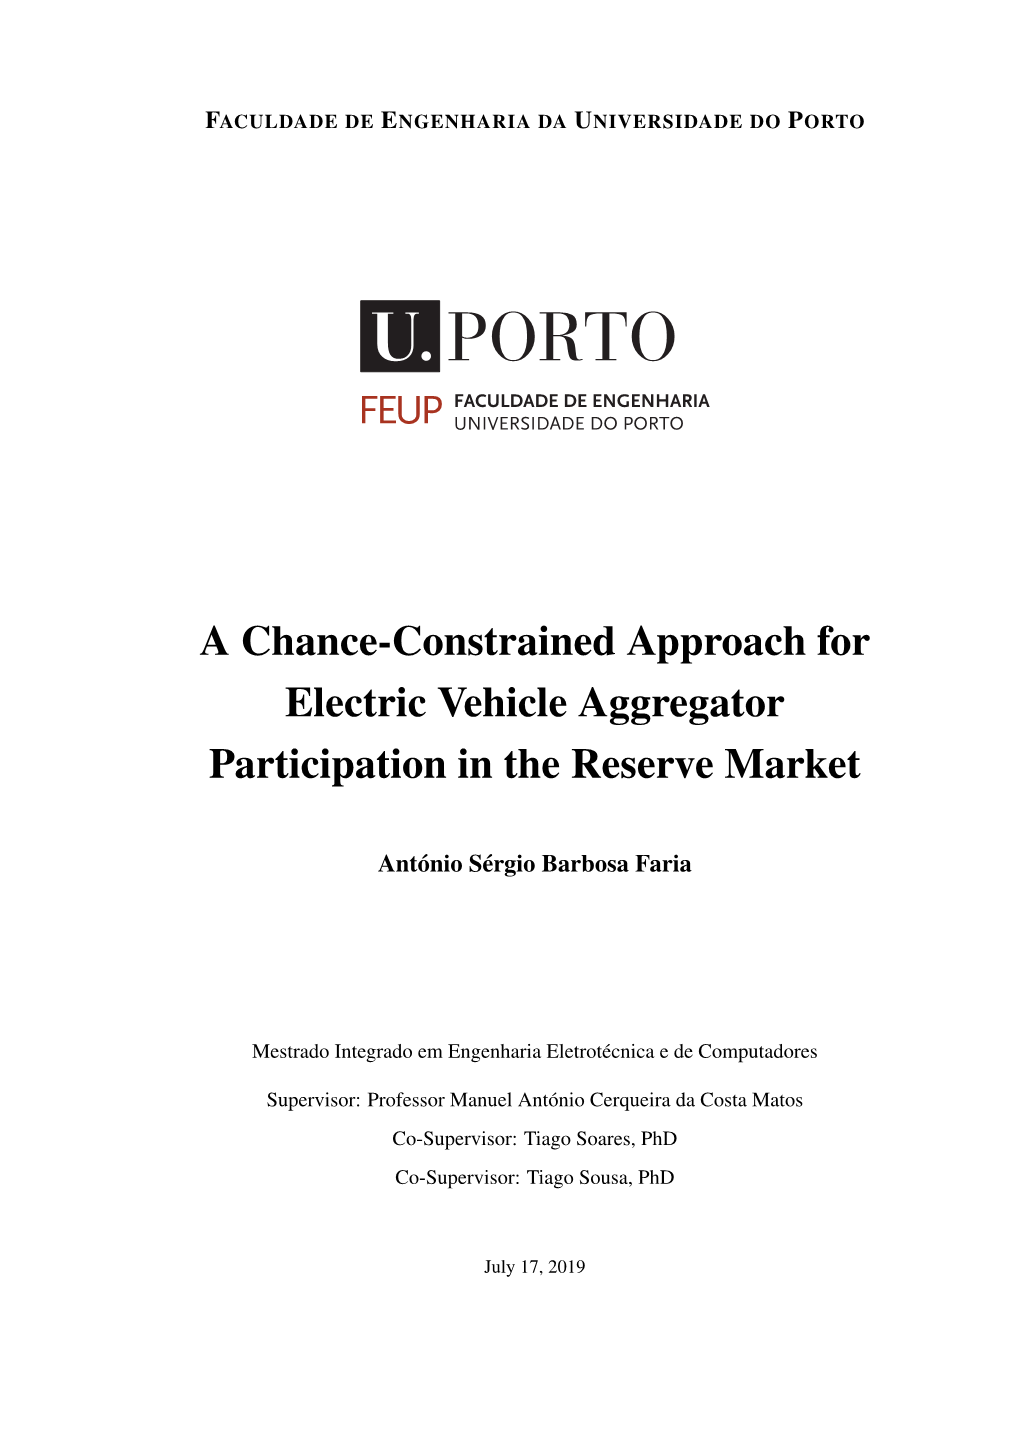 A Chance-Constrained Approach for Electric Vehicle Aggregator Participation in the Reserve Market